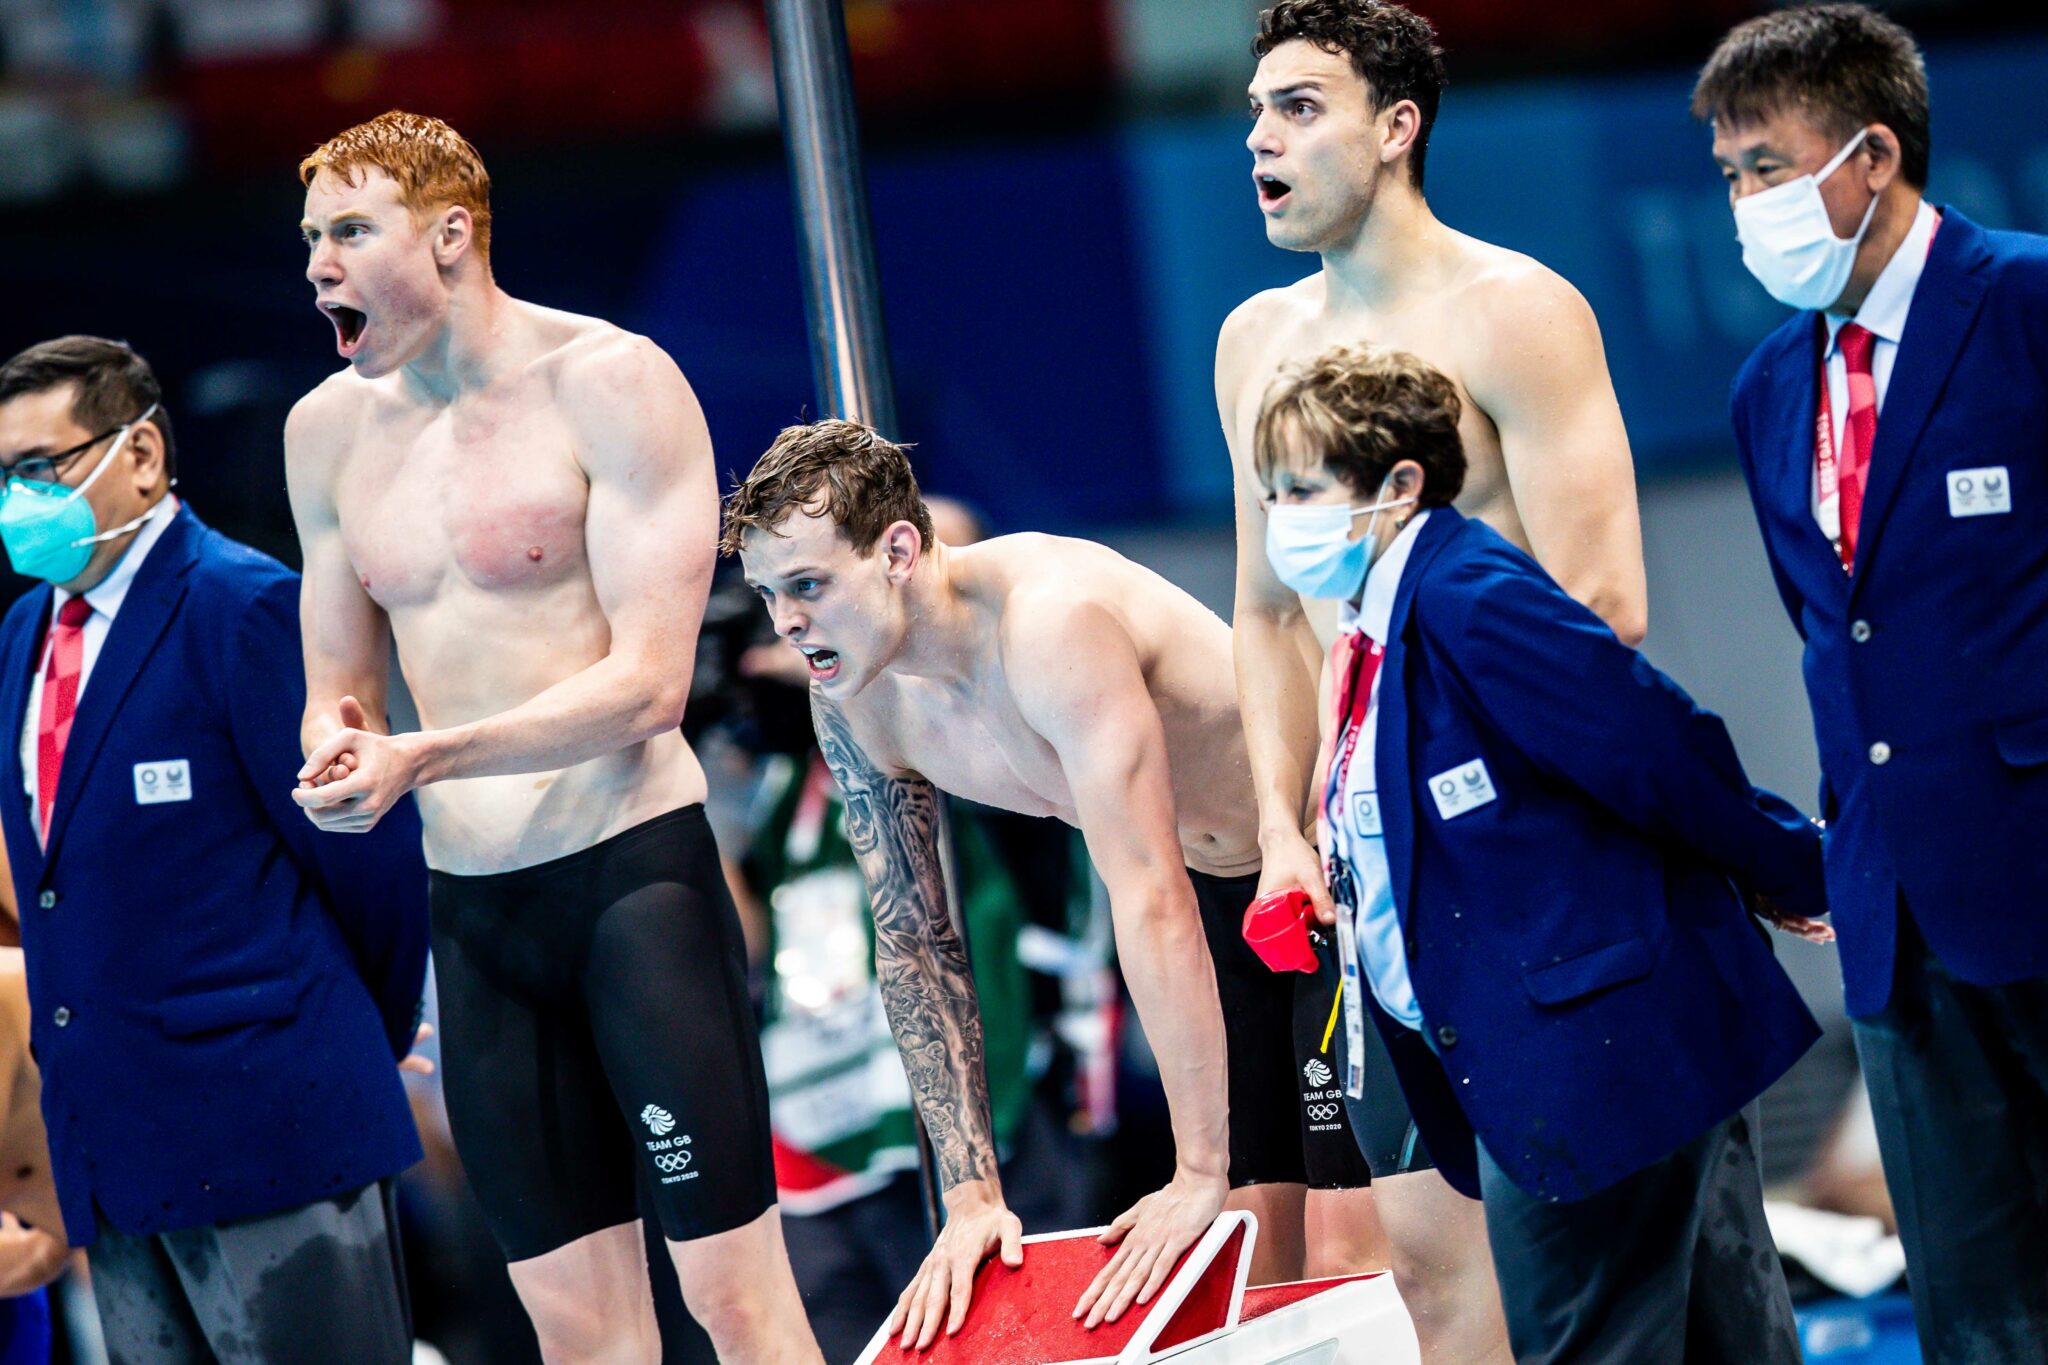 BBC Wont Broadcast Swimming at 2023 Worlds After Negotiations Fail (How To Watch)